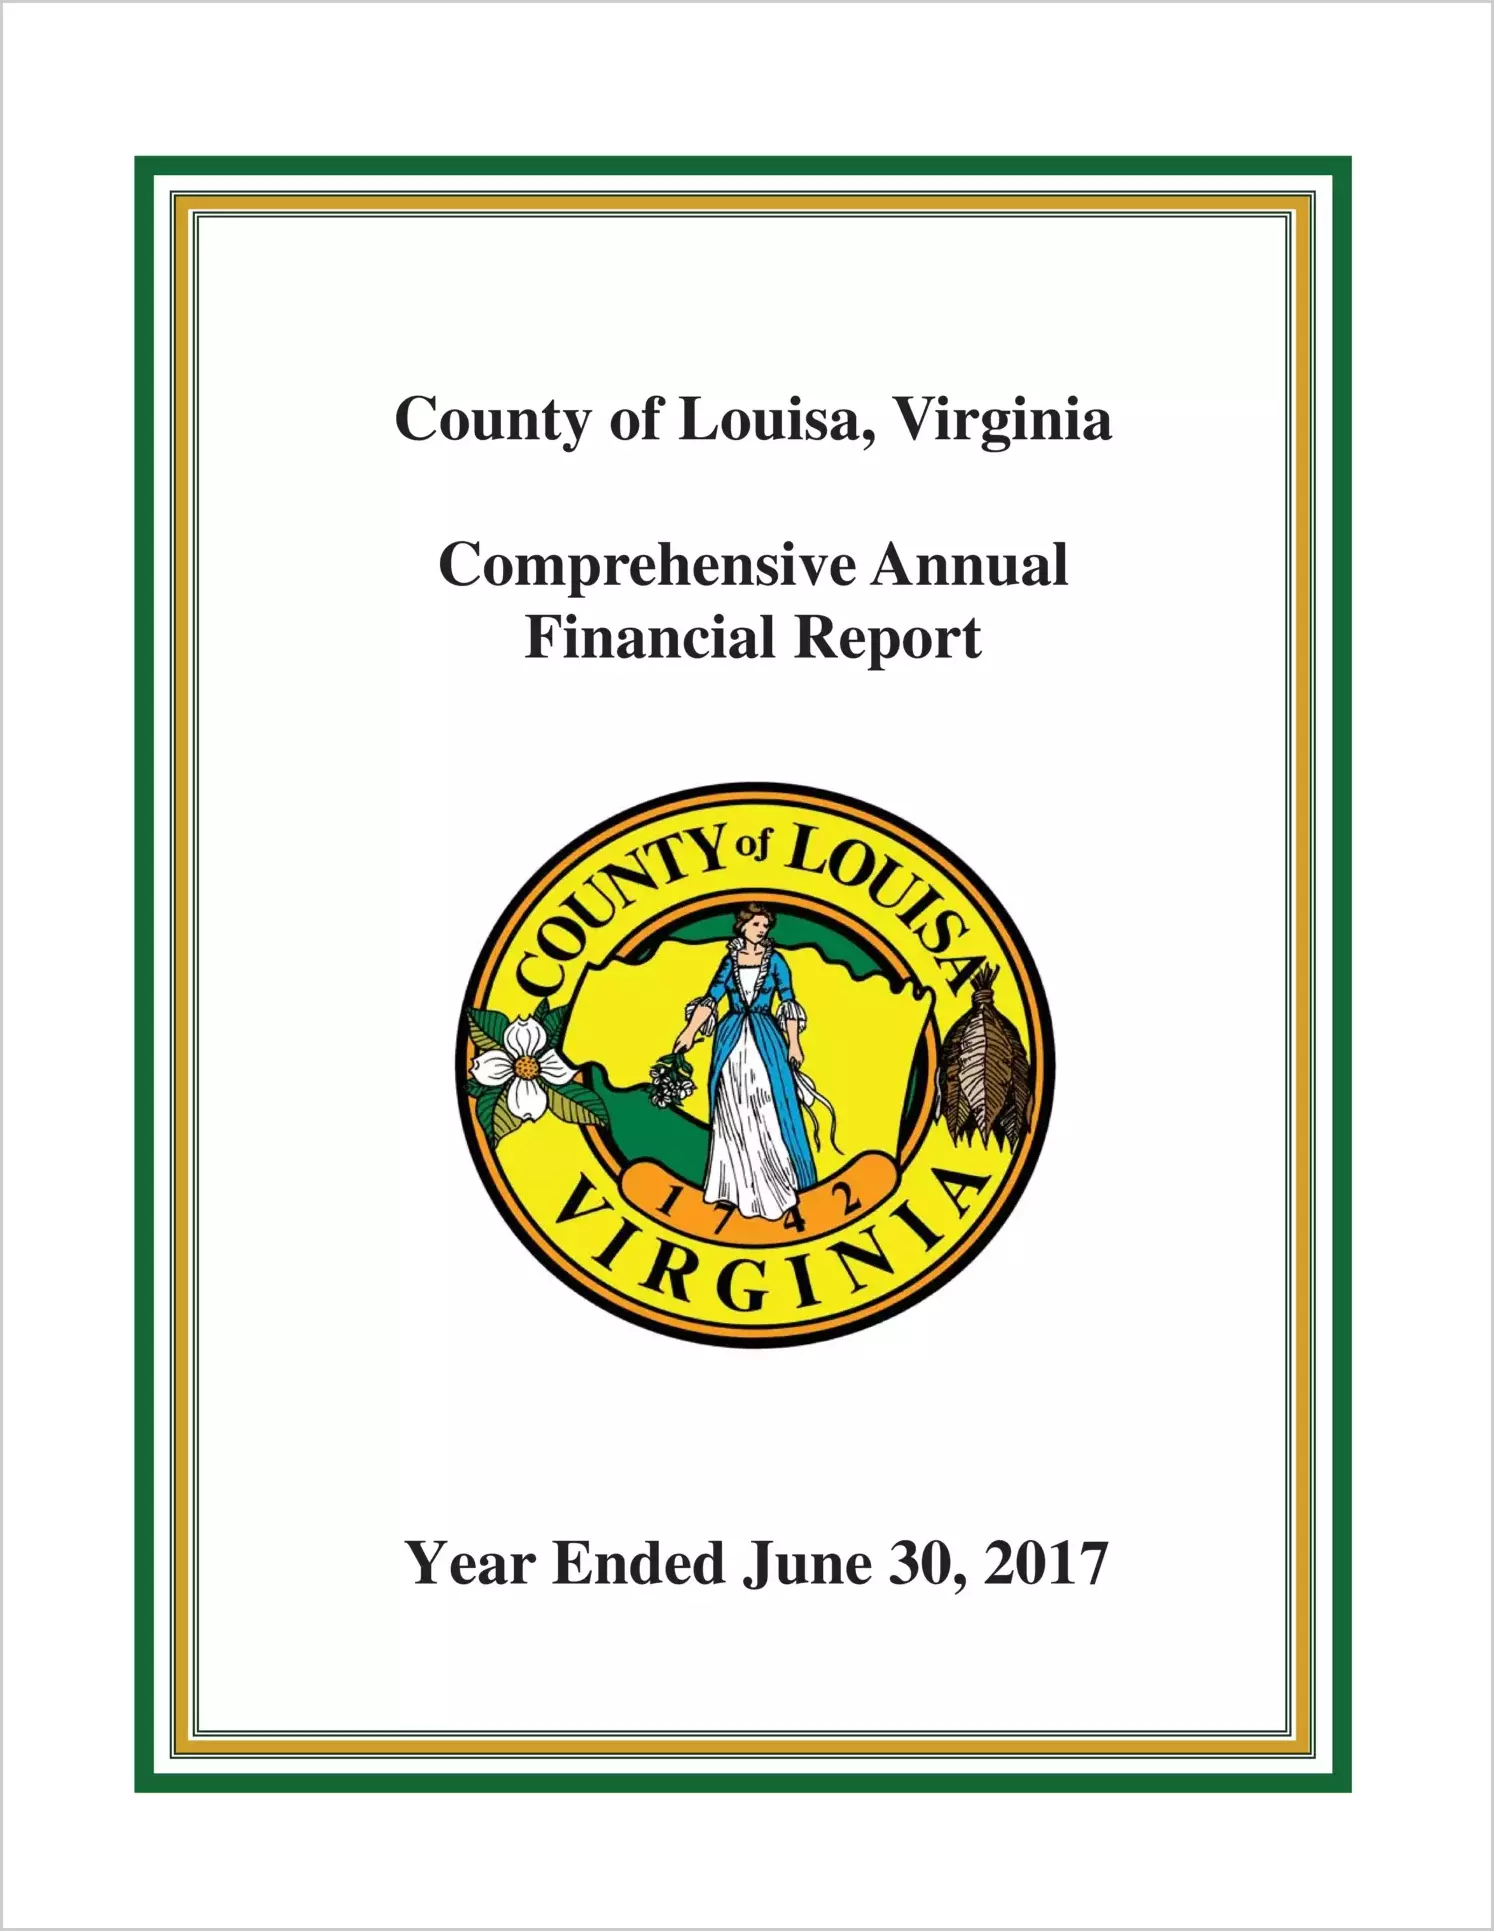 2017 Annual Financial Report for County of Louisa